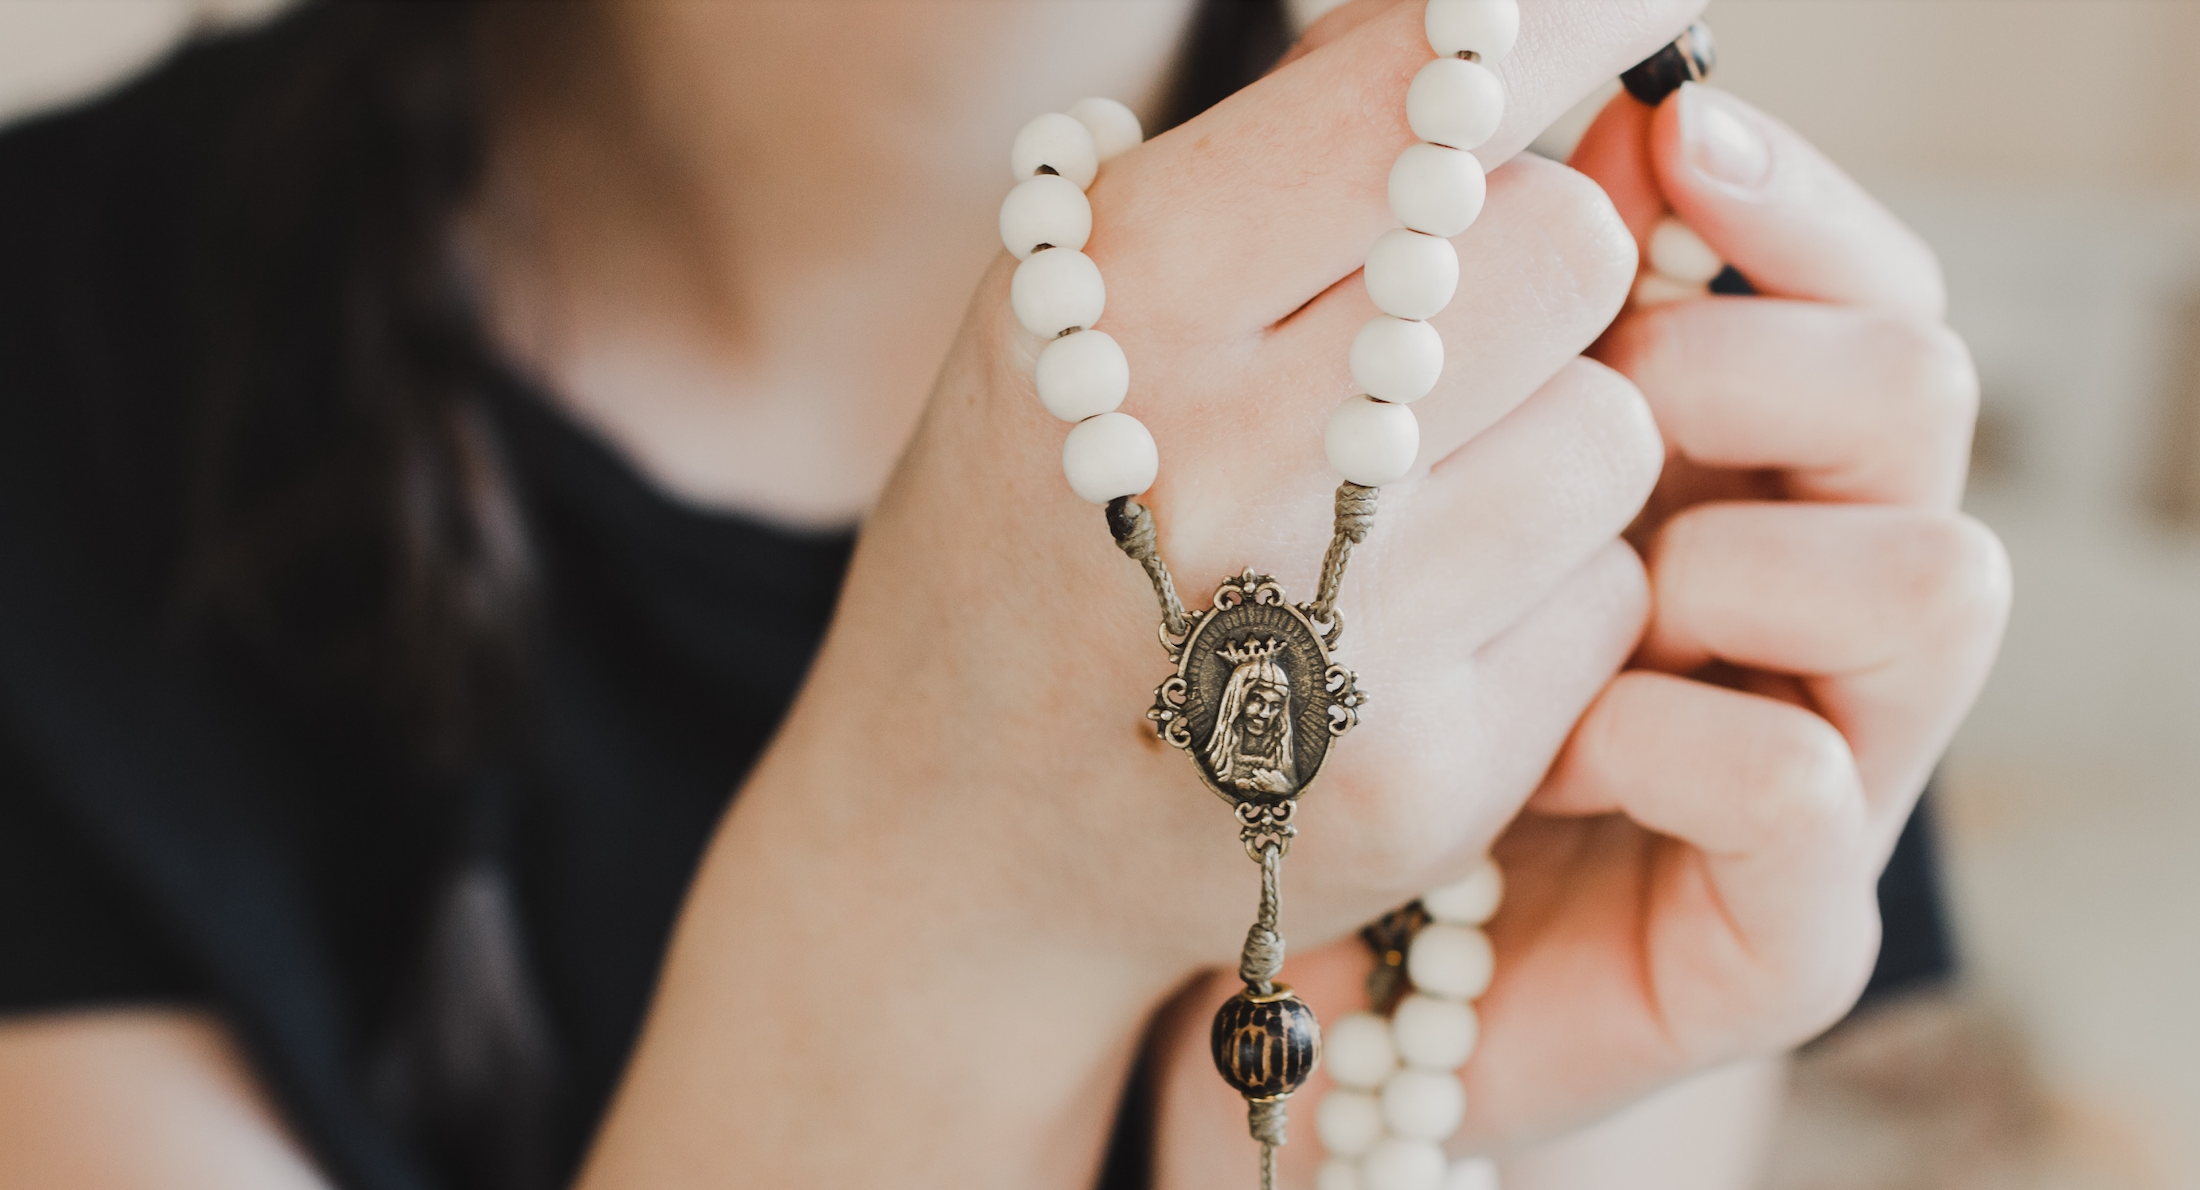 The 15 Promises of the Rosary